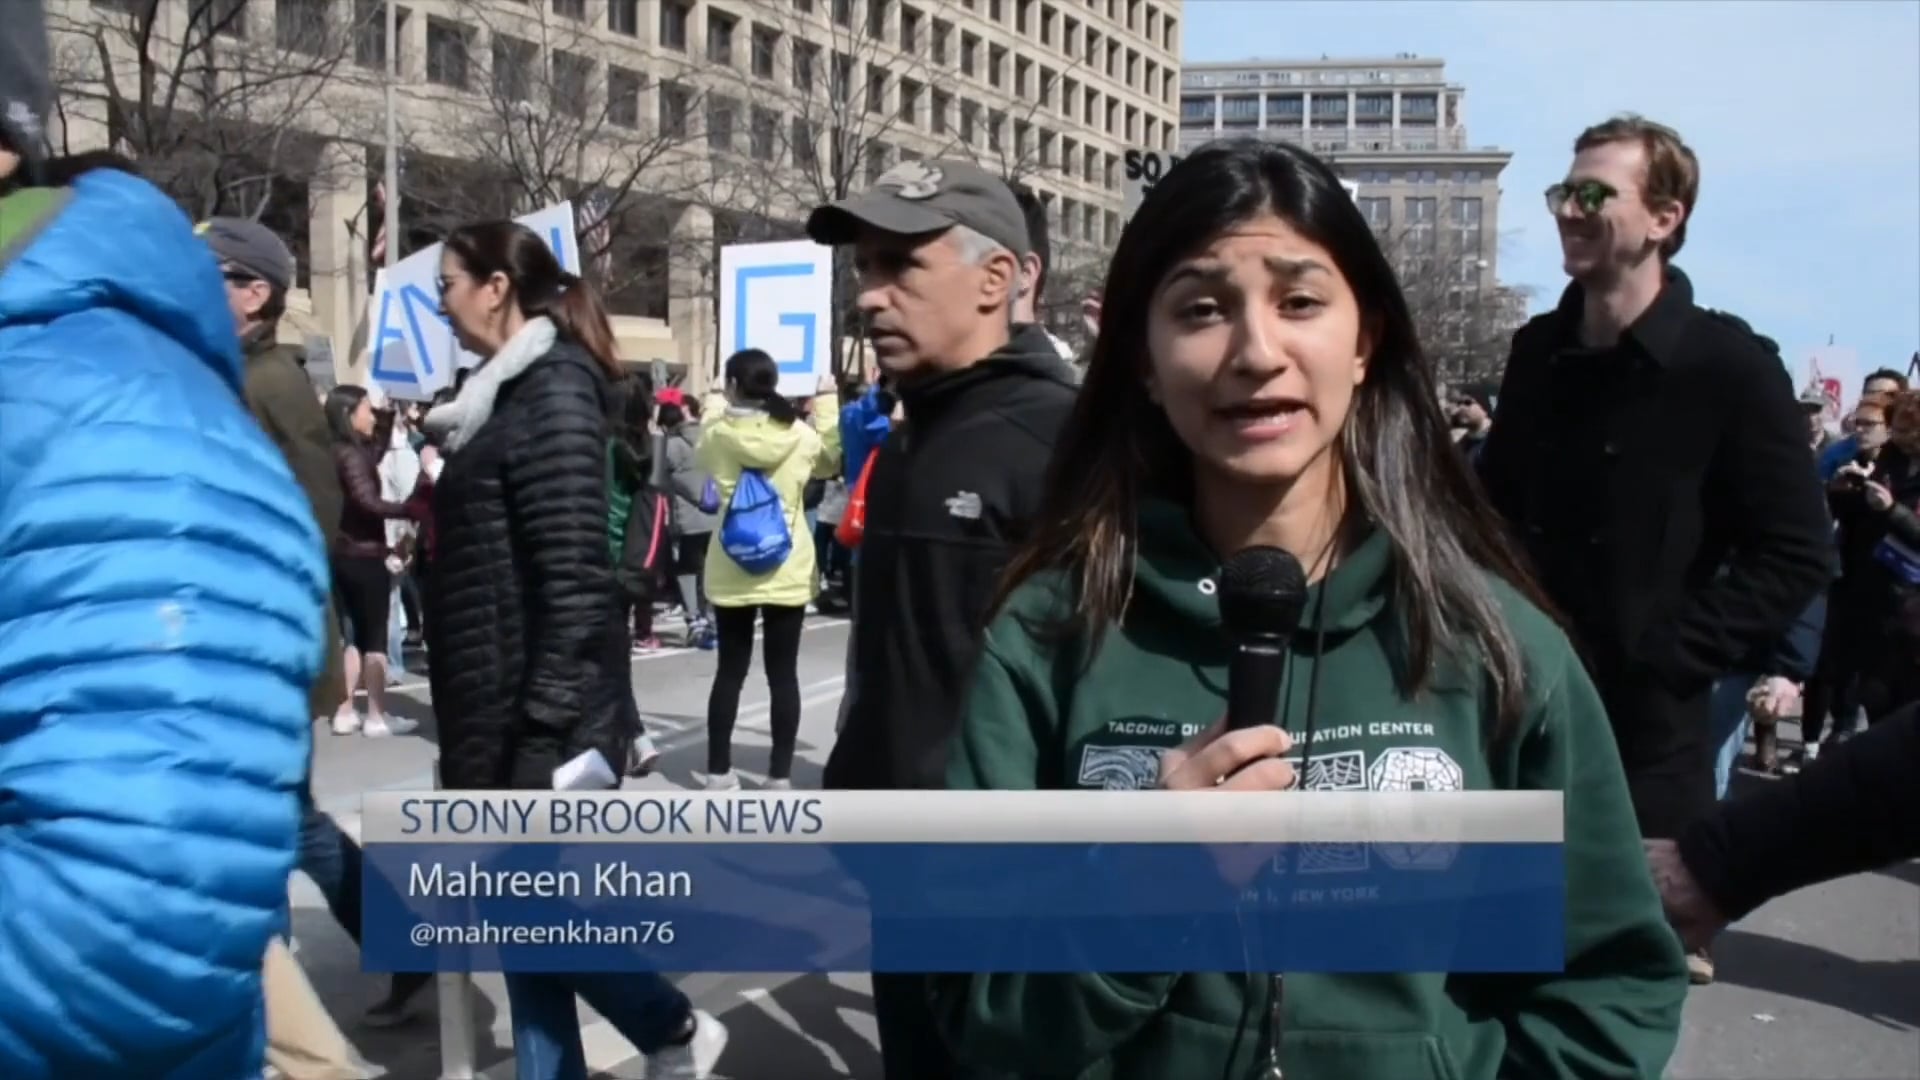 Stony Brook News: Long Island’s March For Our Lives